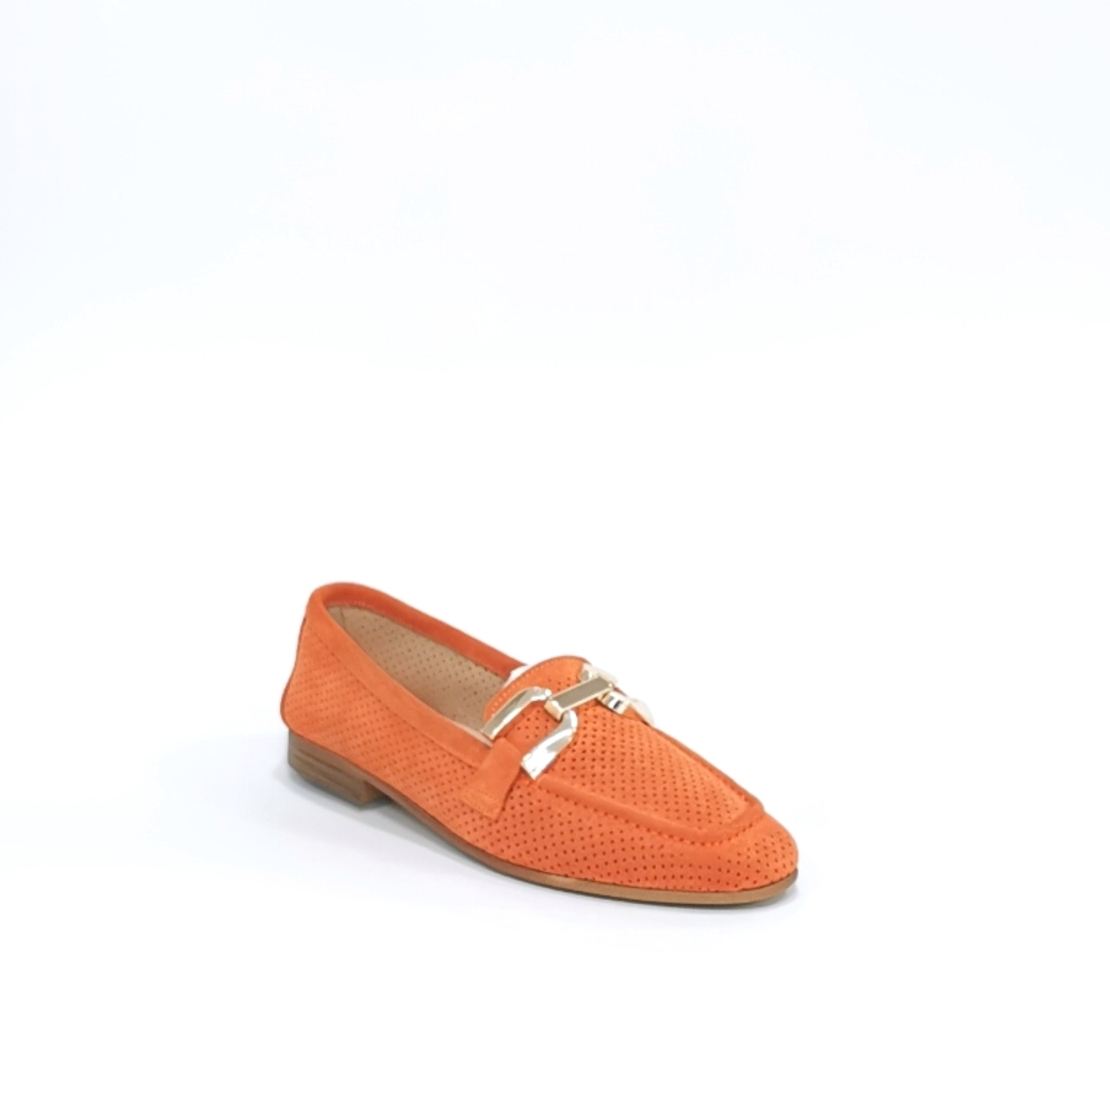 Women's moccasins / loafers / made of natural leather in orange color/7163